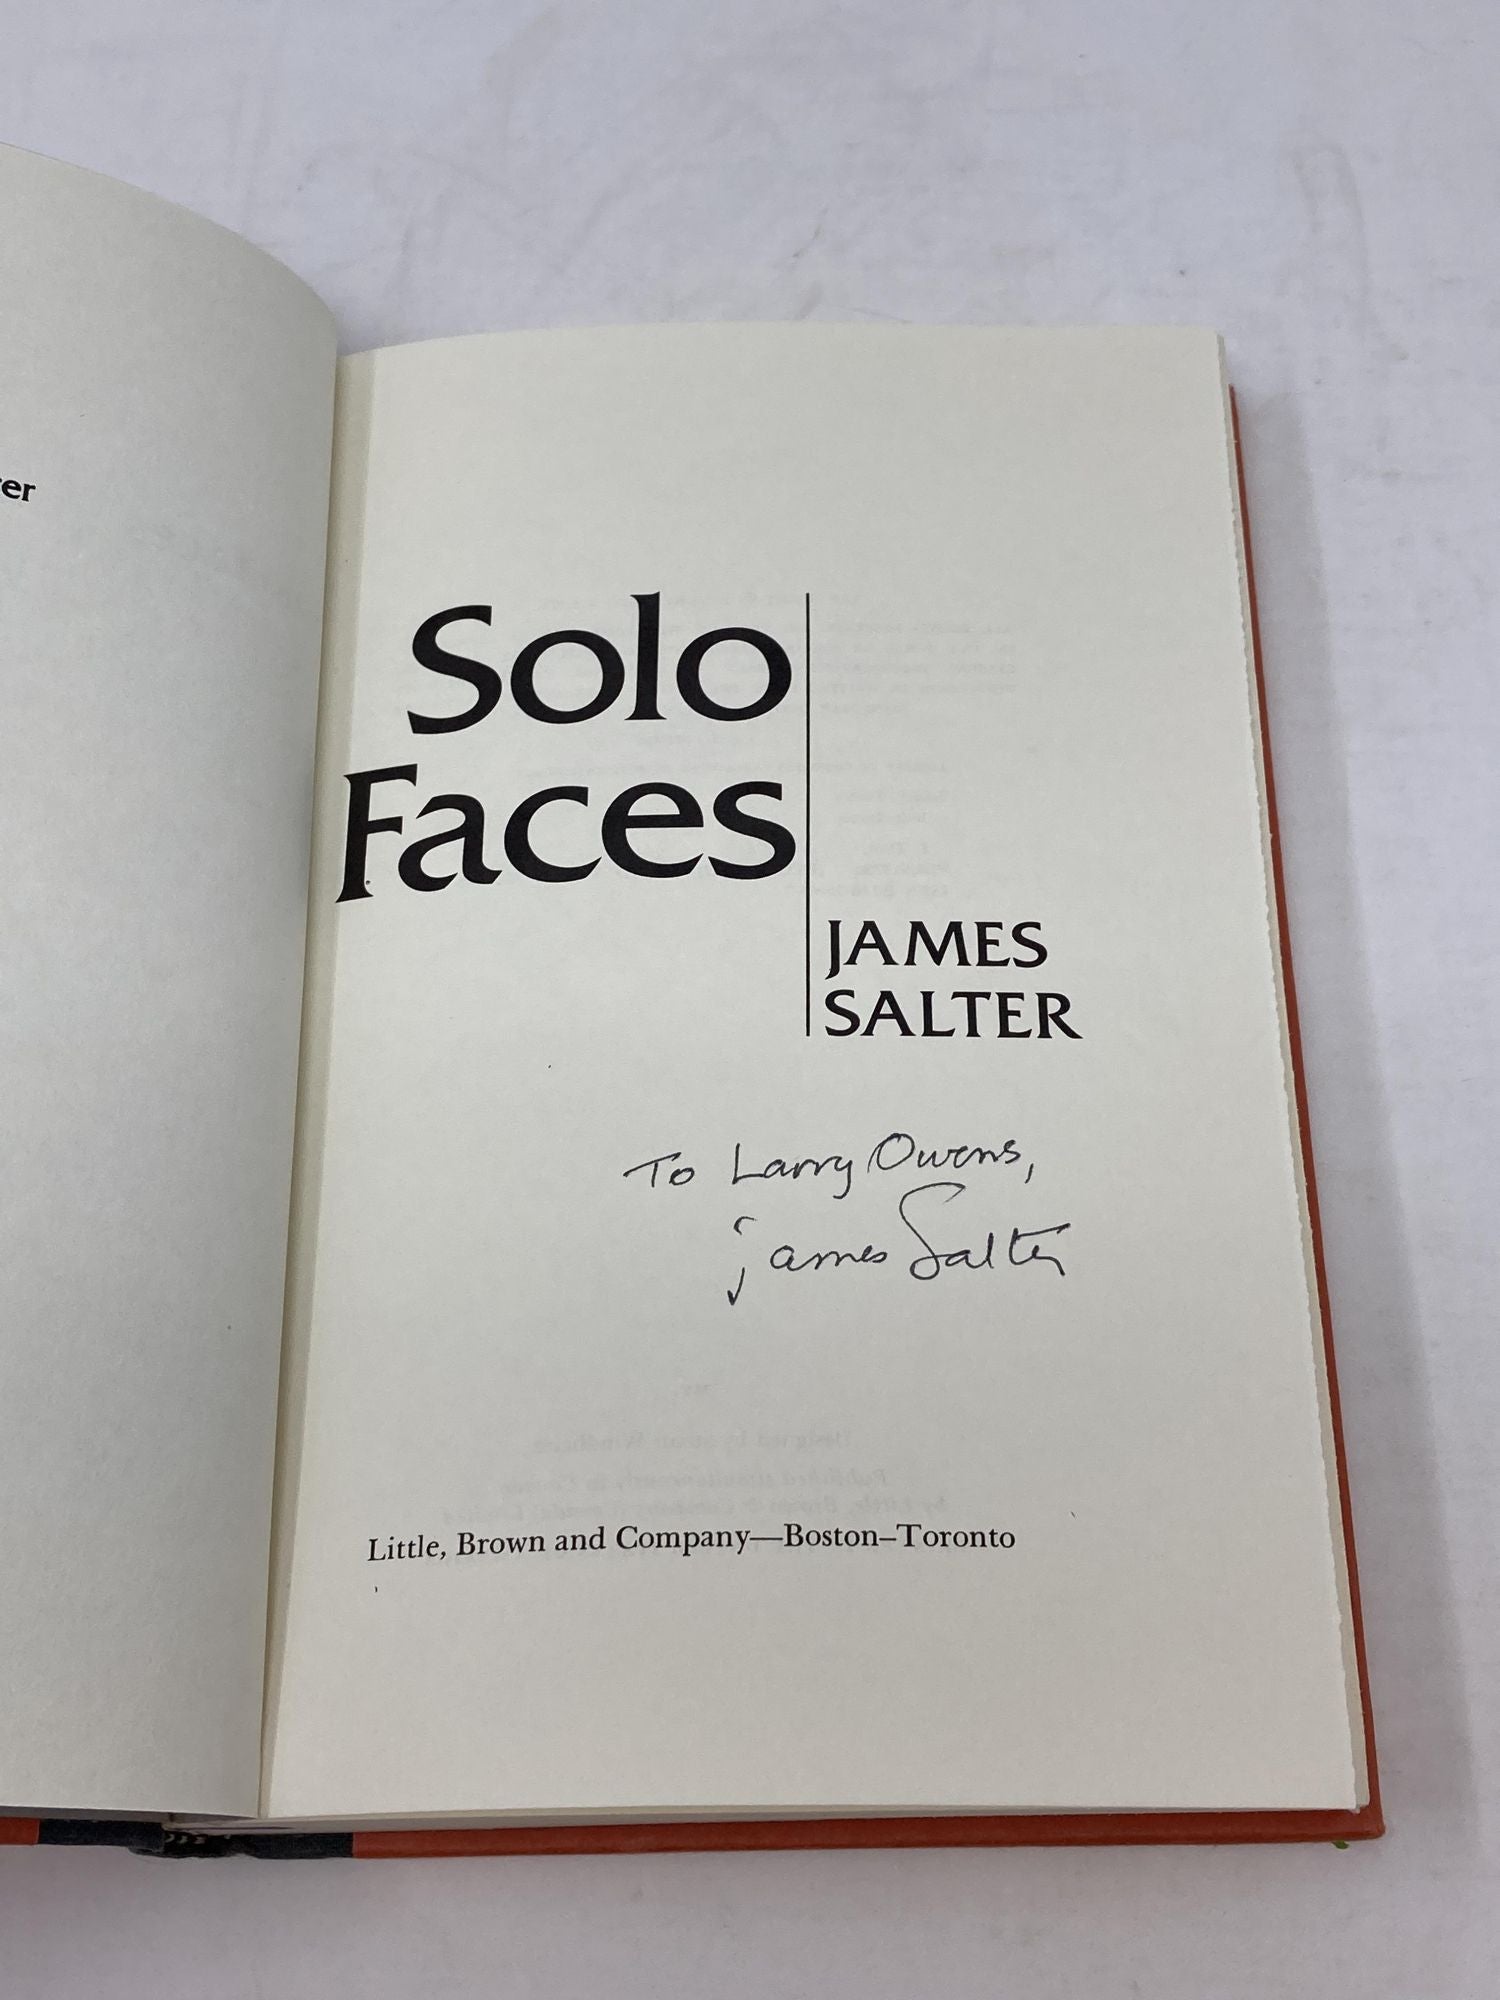 Salter, James - Solo Faces (Signed)